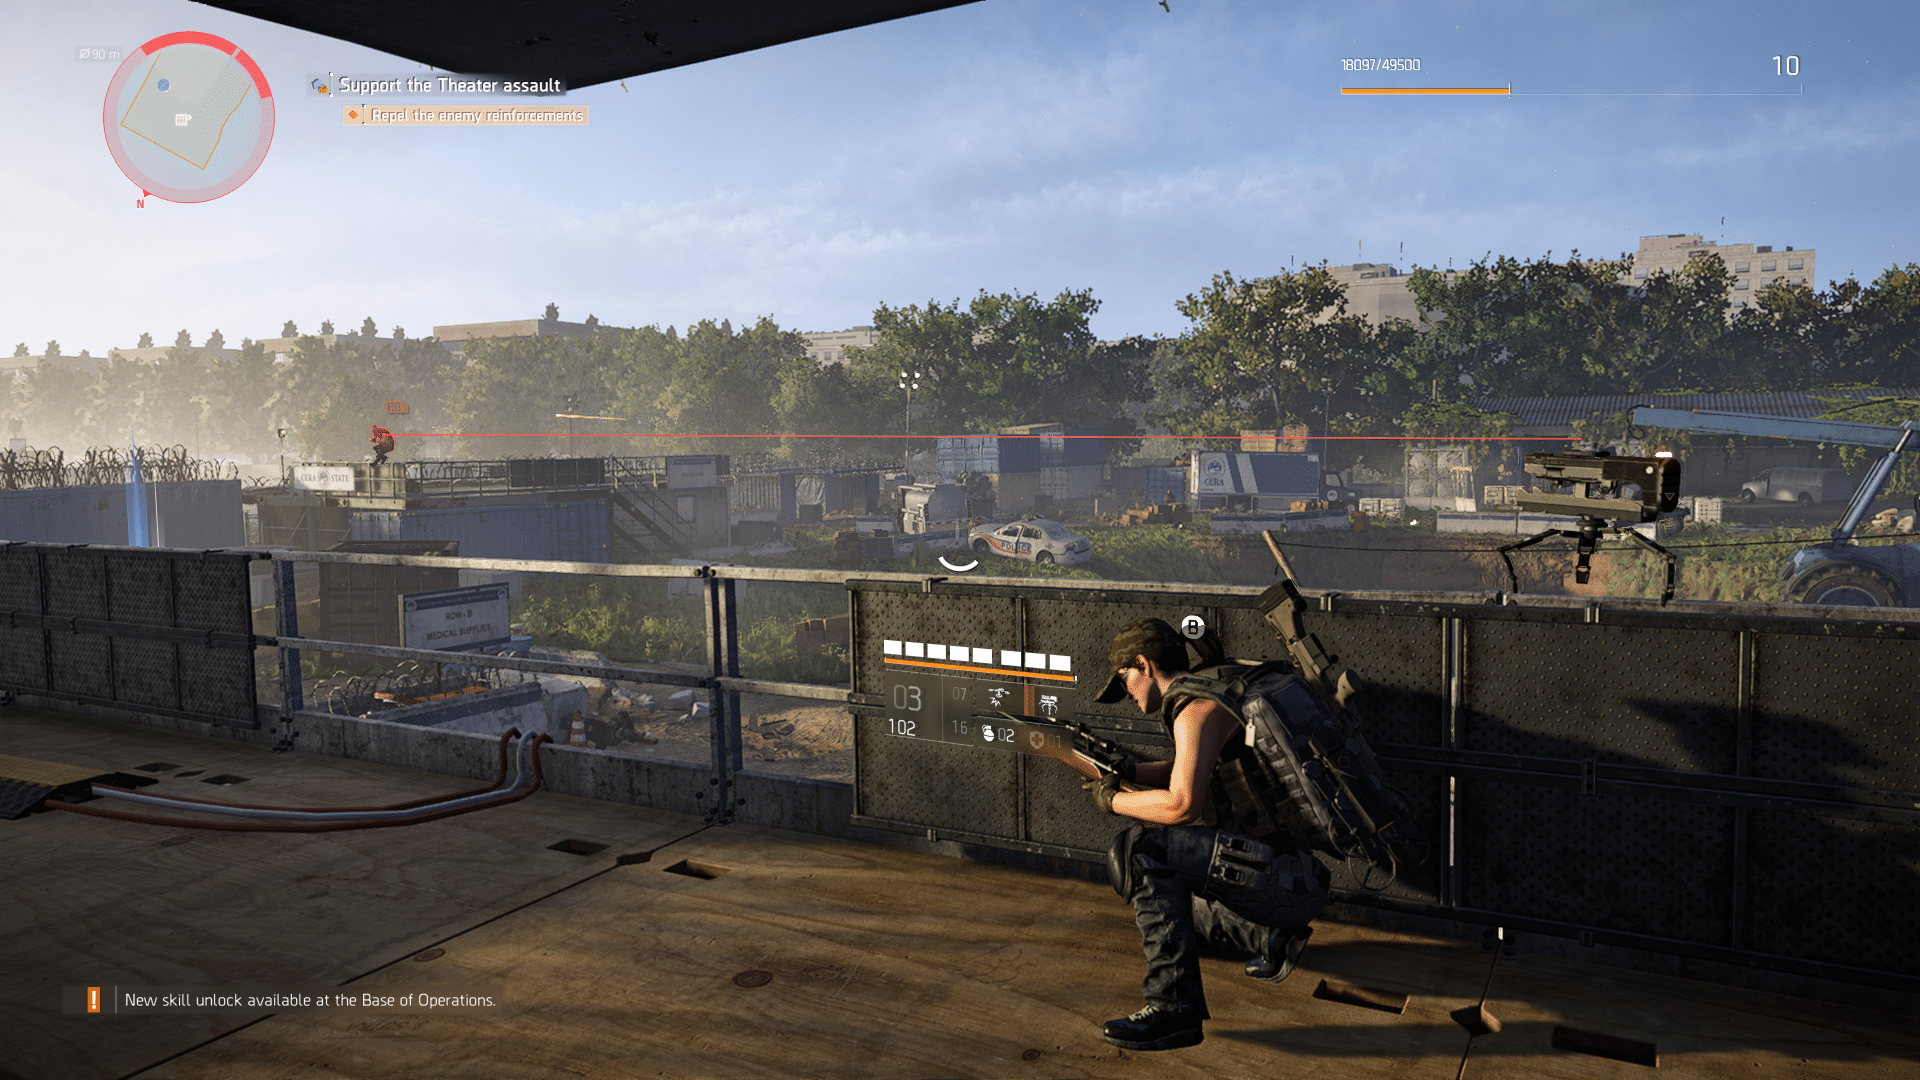 TheDivision2 3 30 2019 10 55 38 PM 991